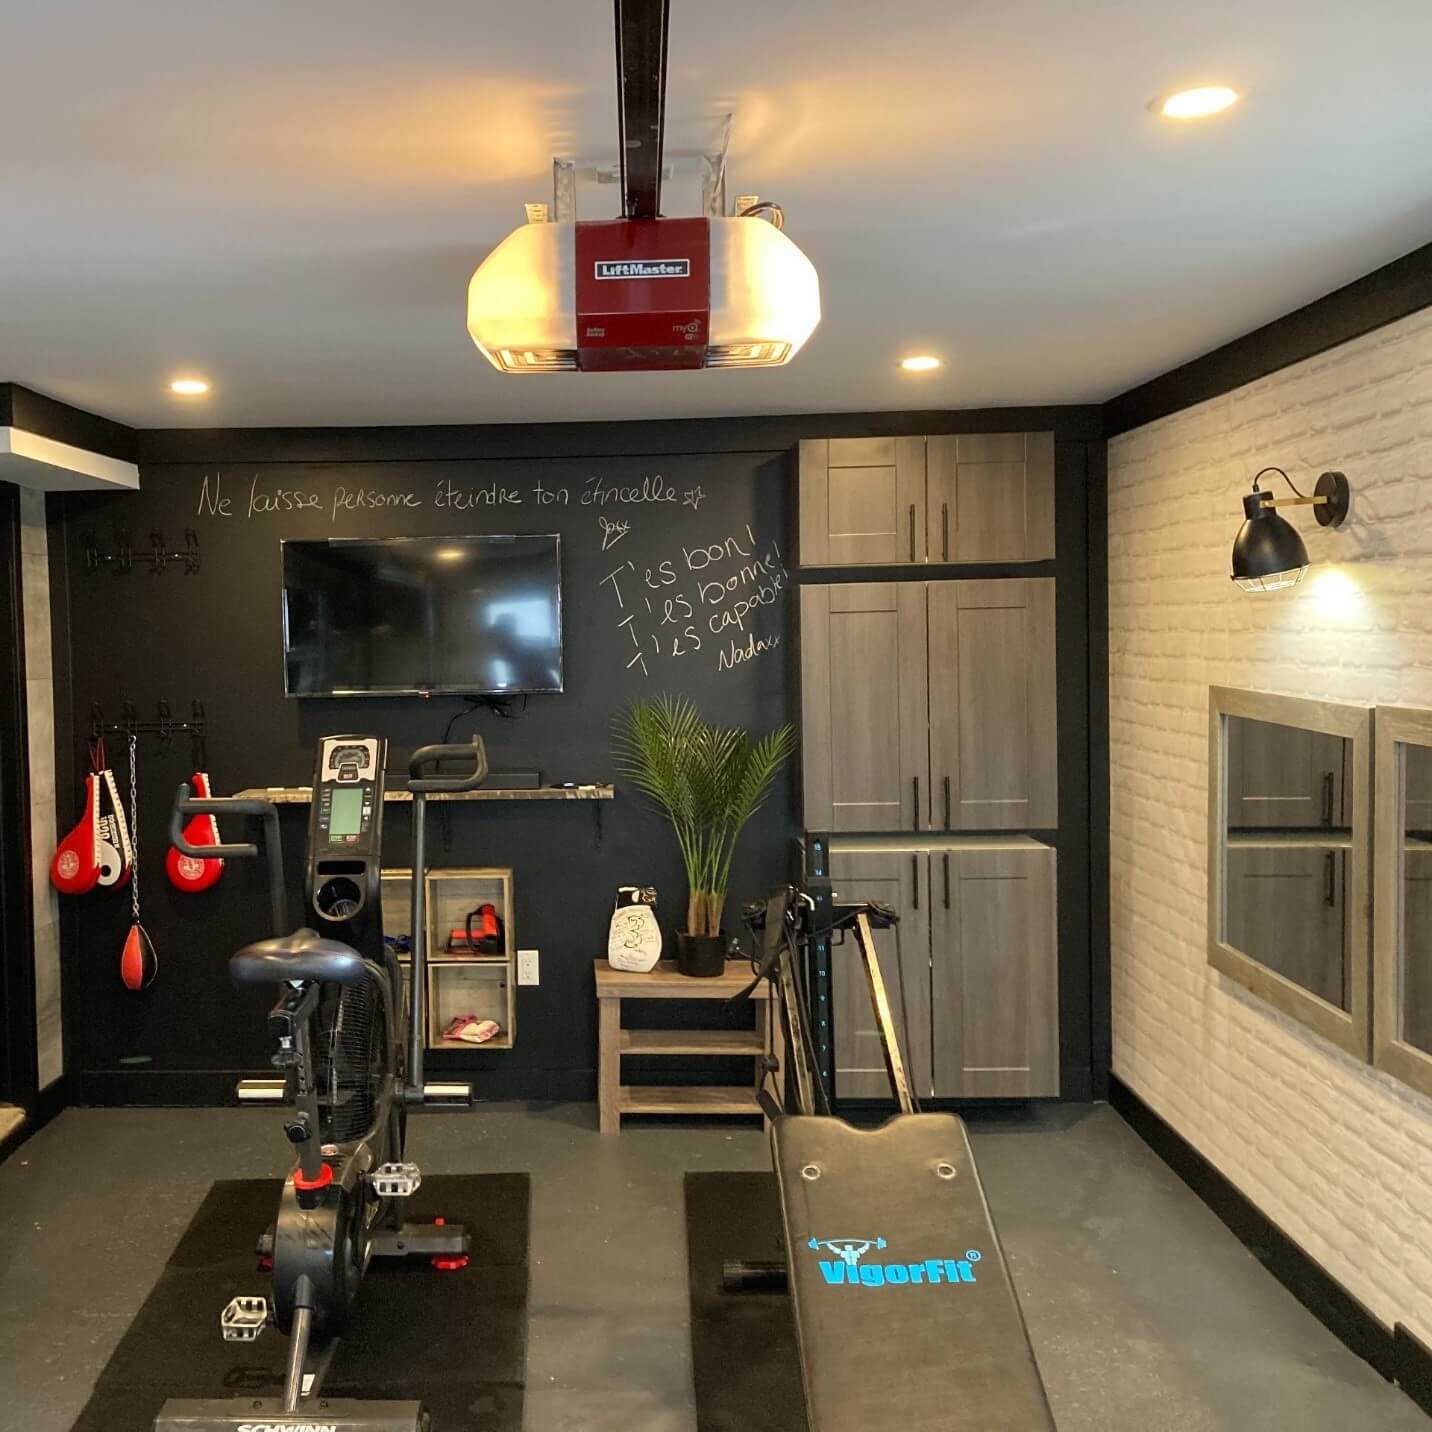 Finished walls, built-ins, a brand new LiftMaster door opener, Gregory really has an awesome gym!